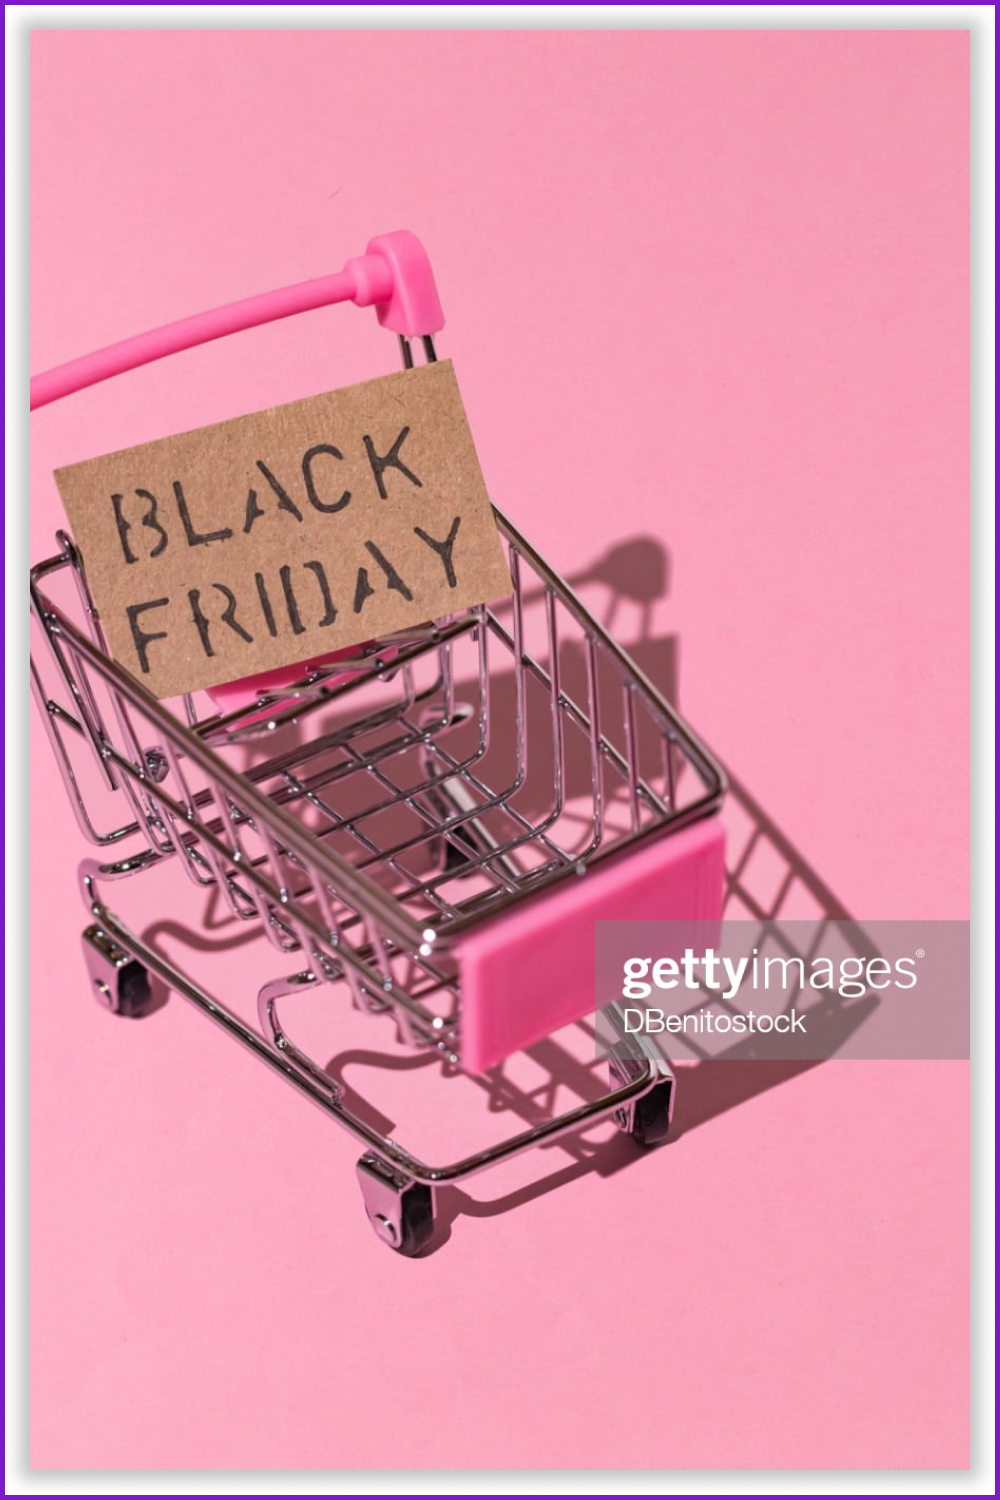 Shopping cart with the sign “Black Friday” on the pink background.